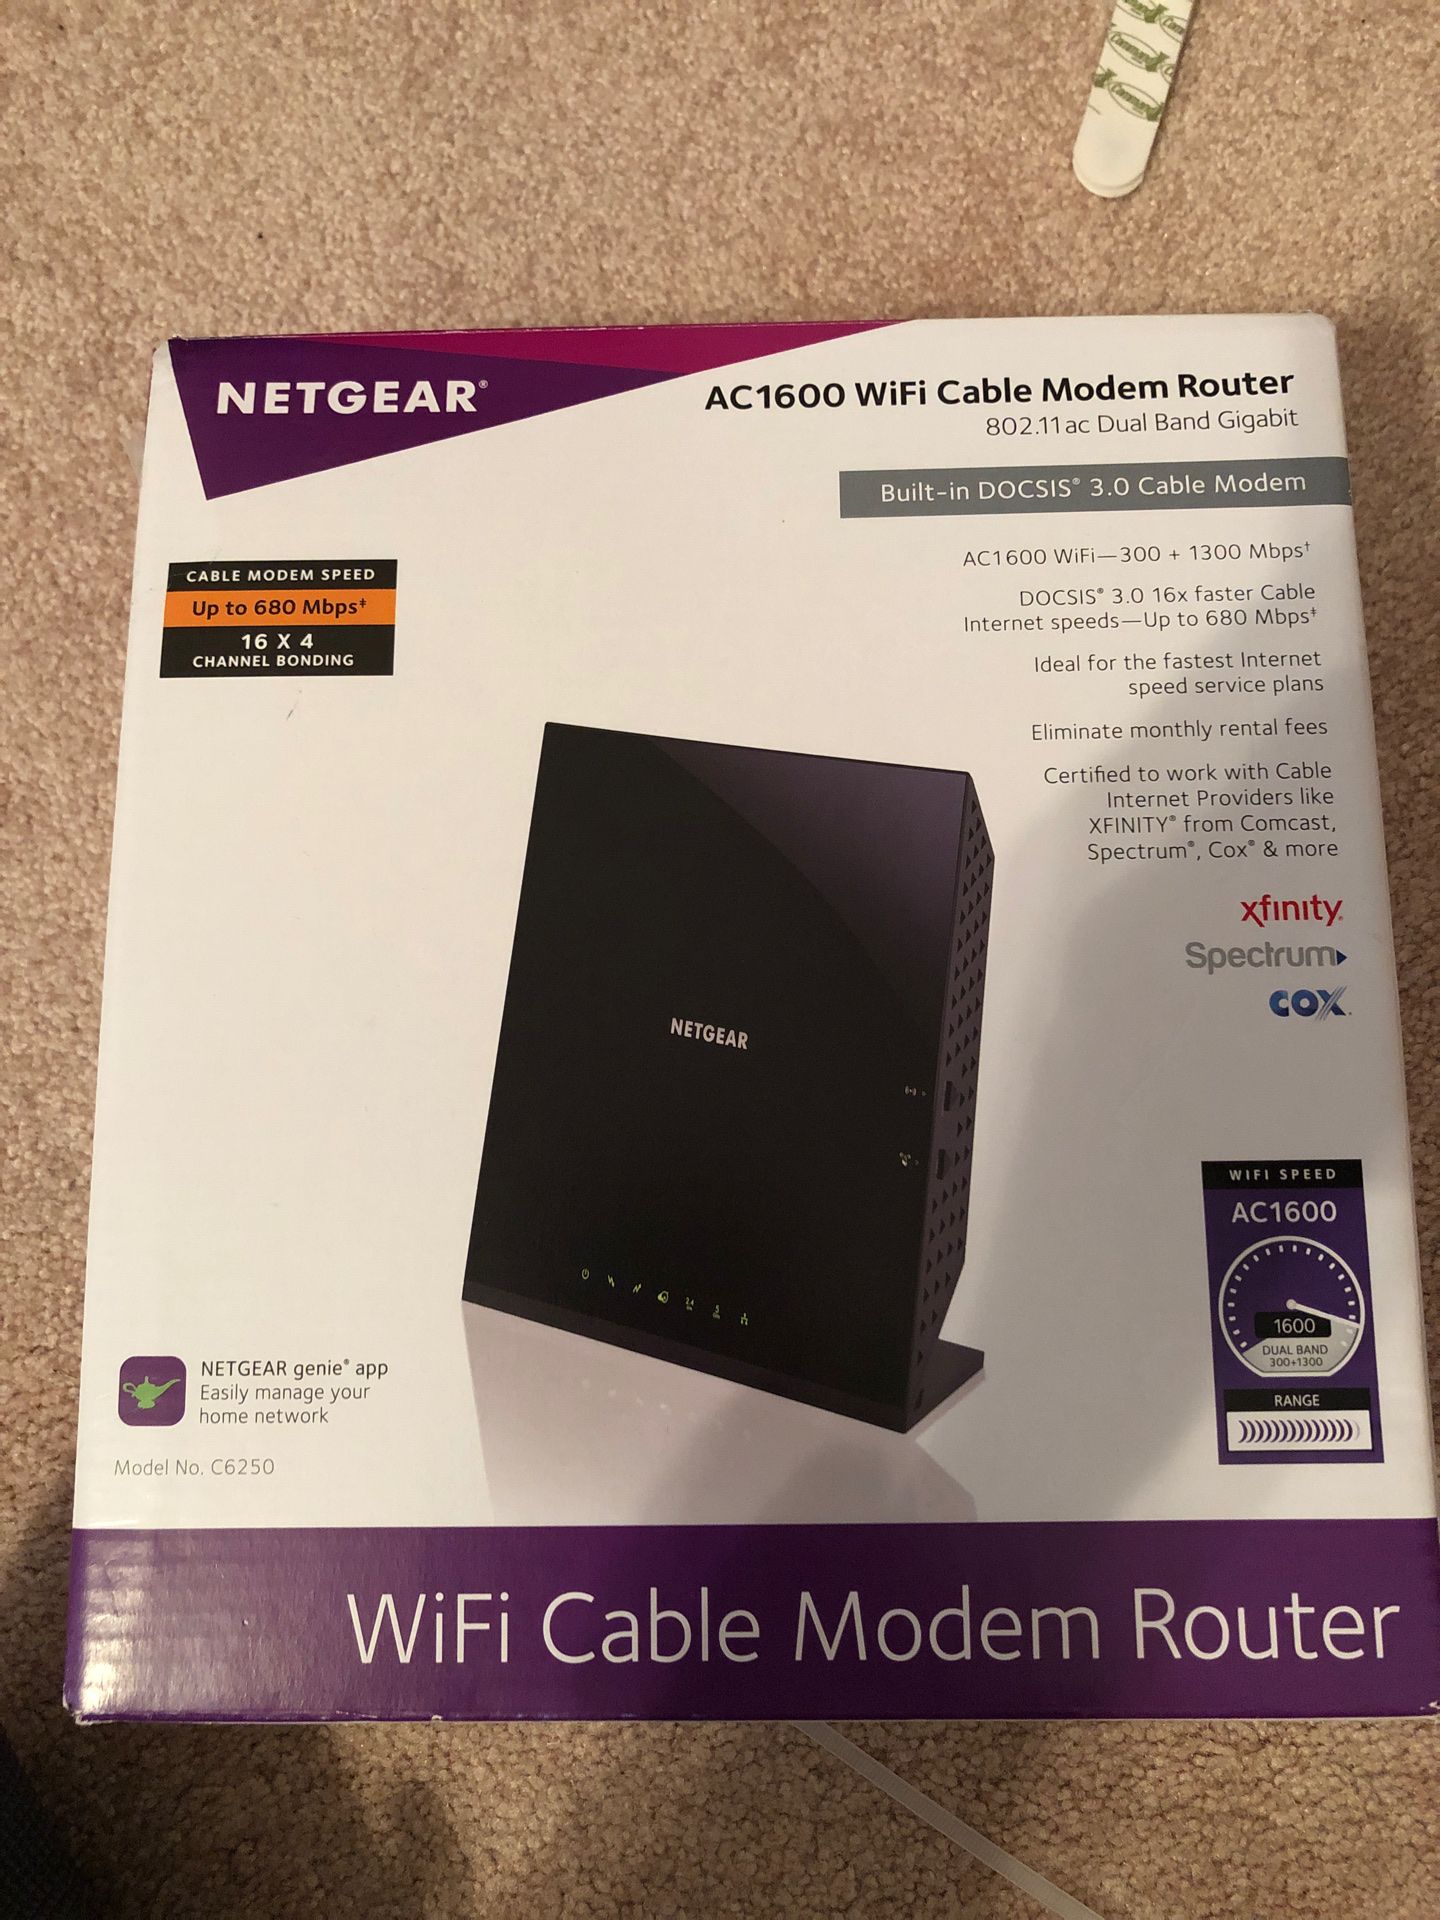 Nethear AC1600 cable Modem Router